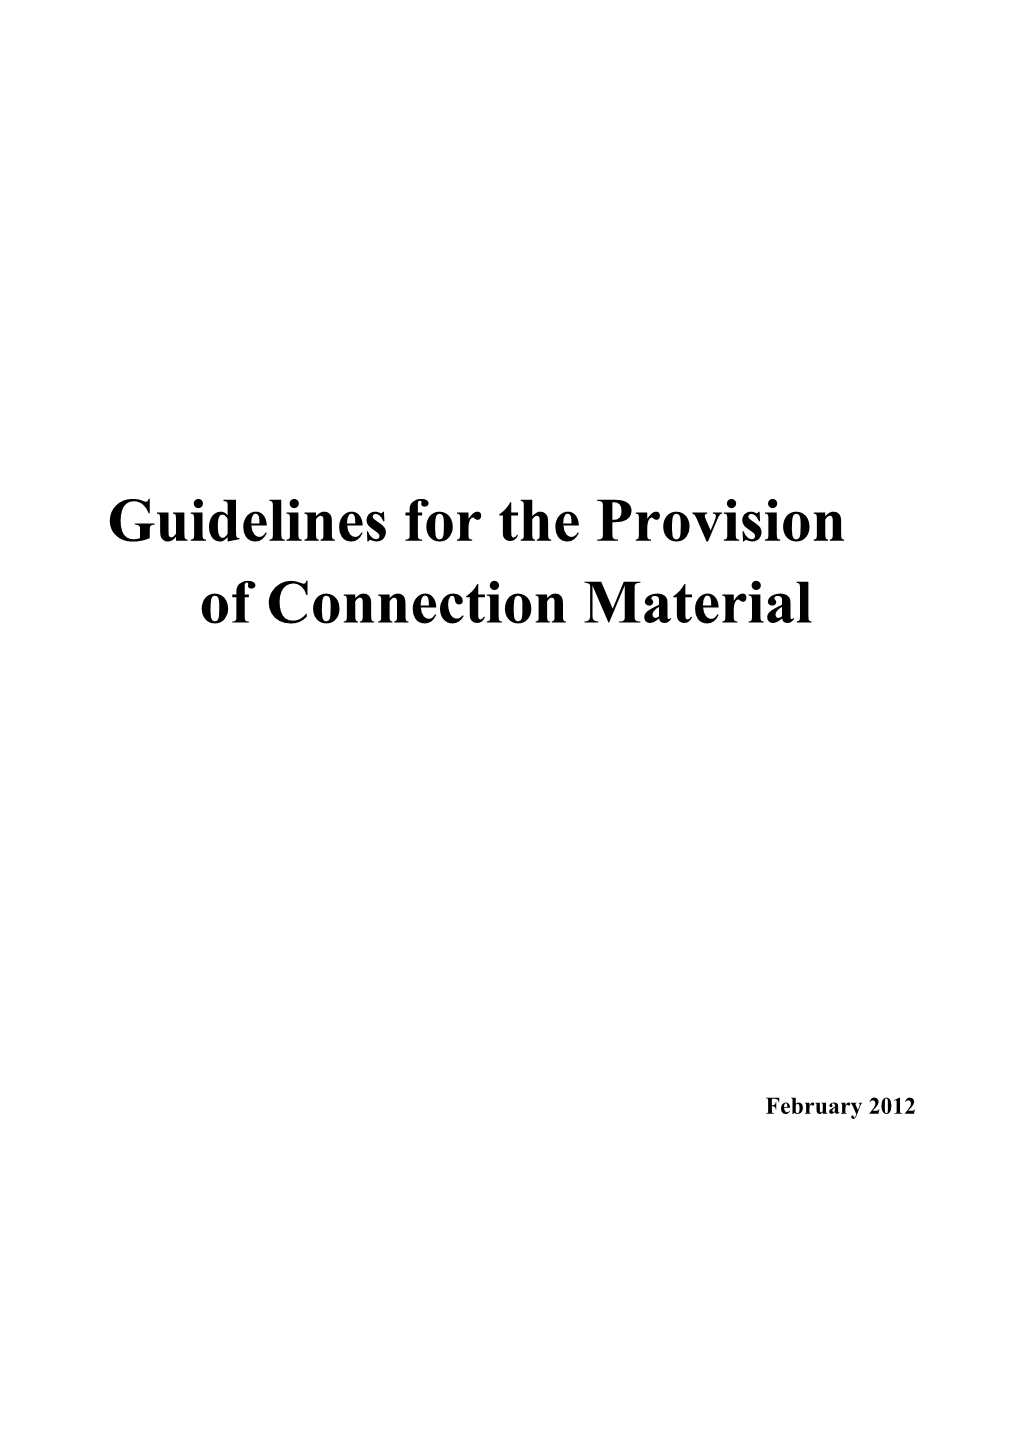 Connection Guidelines 30 January 2012 Reformatted